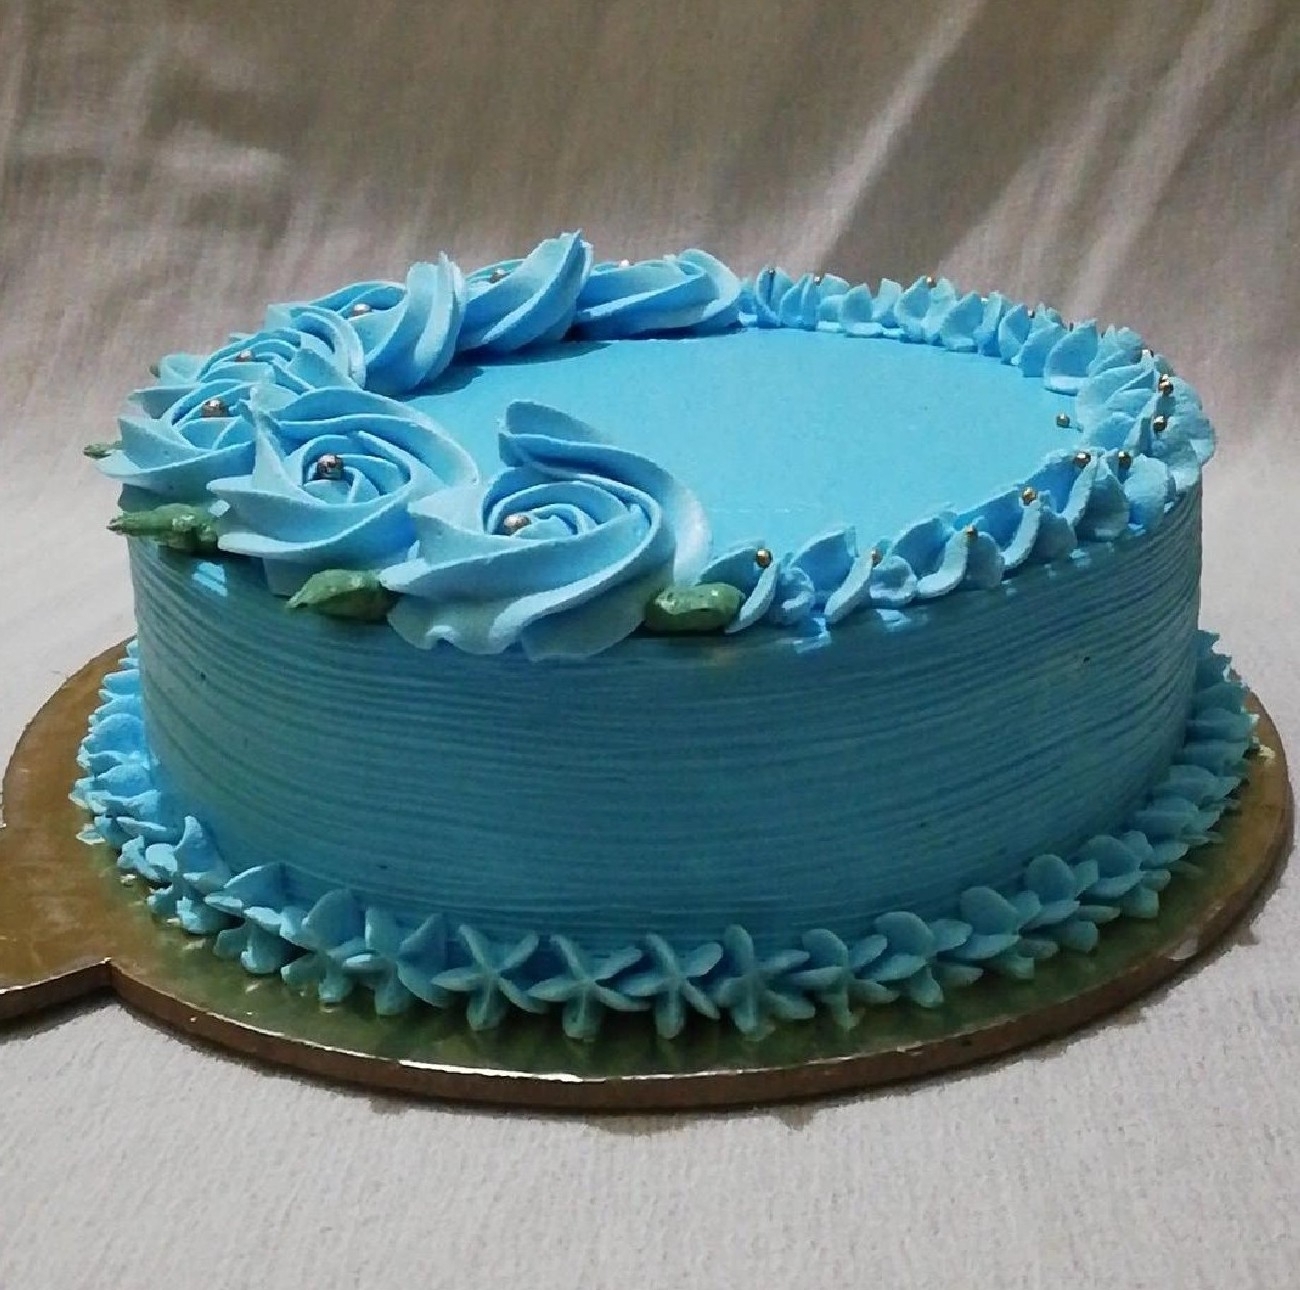 Blue Ombre Cake - Belly Full